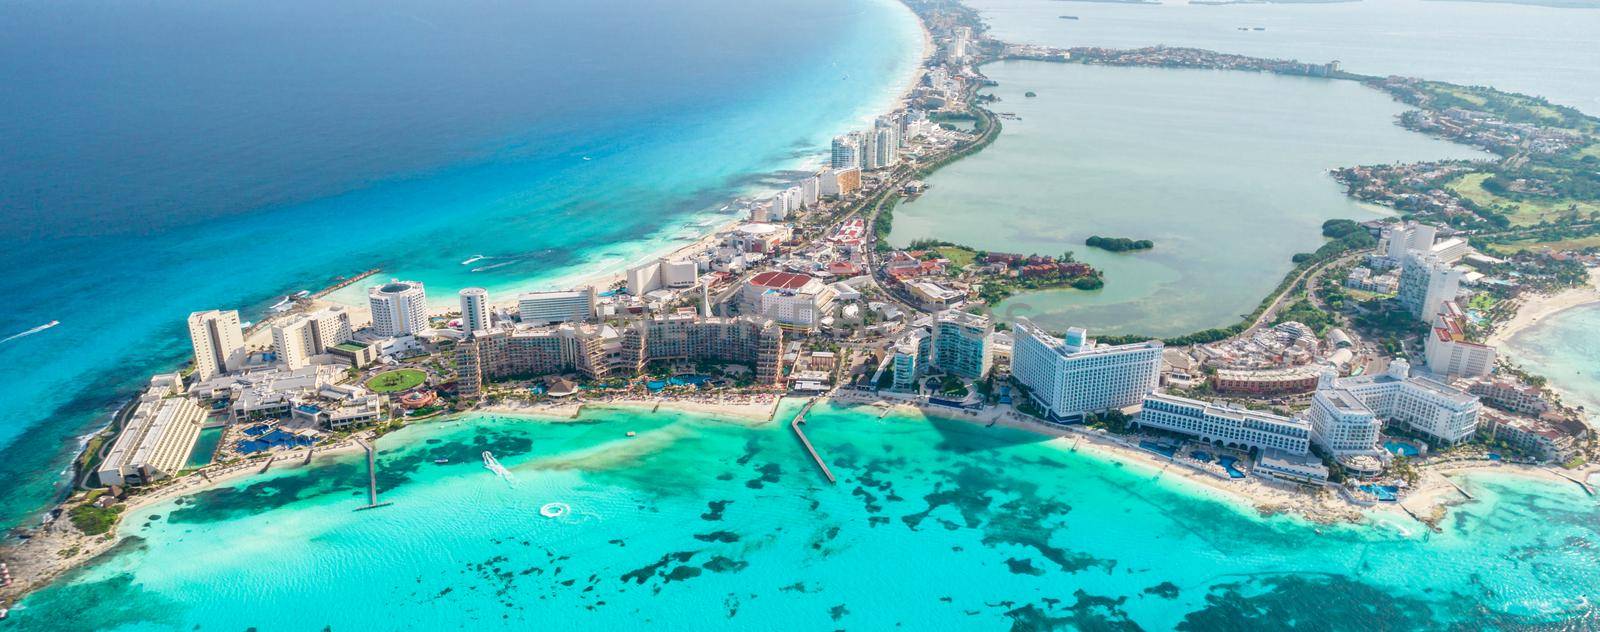 Aerial panoramic view of Cancun beach and city hotel zone in Mexico. Caribbean coast landscape of Mexican resort with beach Playa Caracol and Kukulcan road. Riviera Maya in Quintana roo region on Yucatan Peninsula by Mariakray